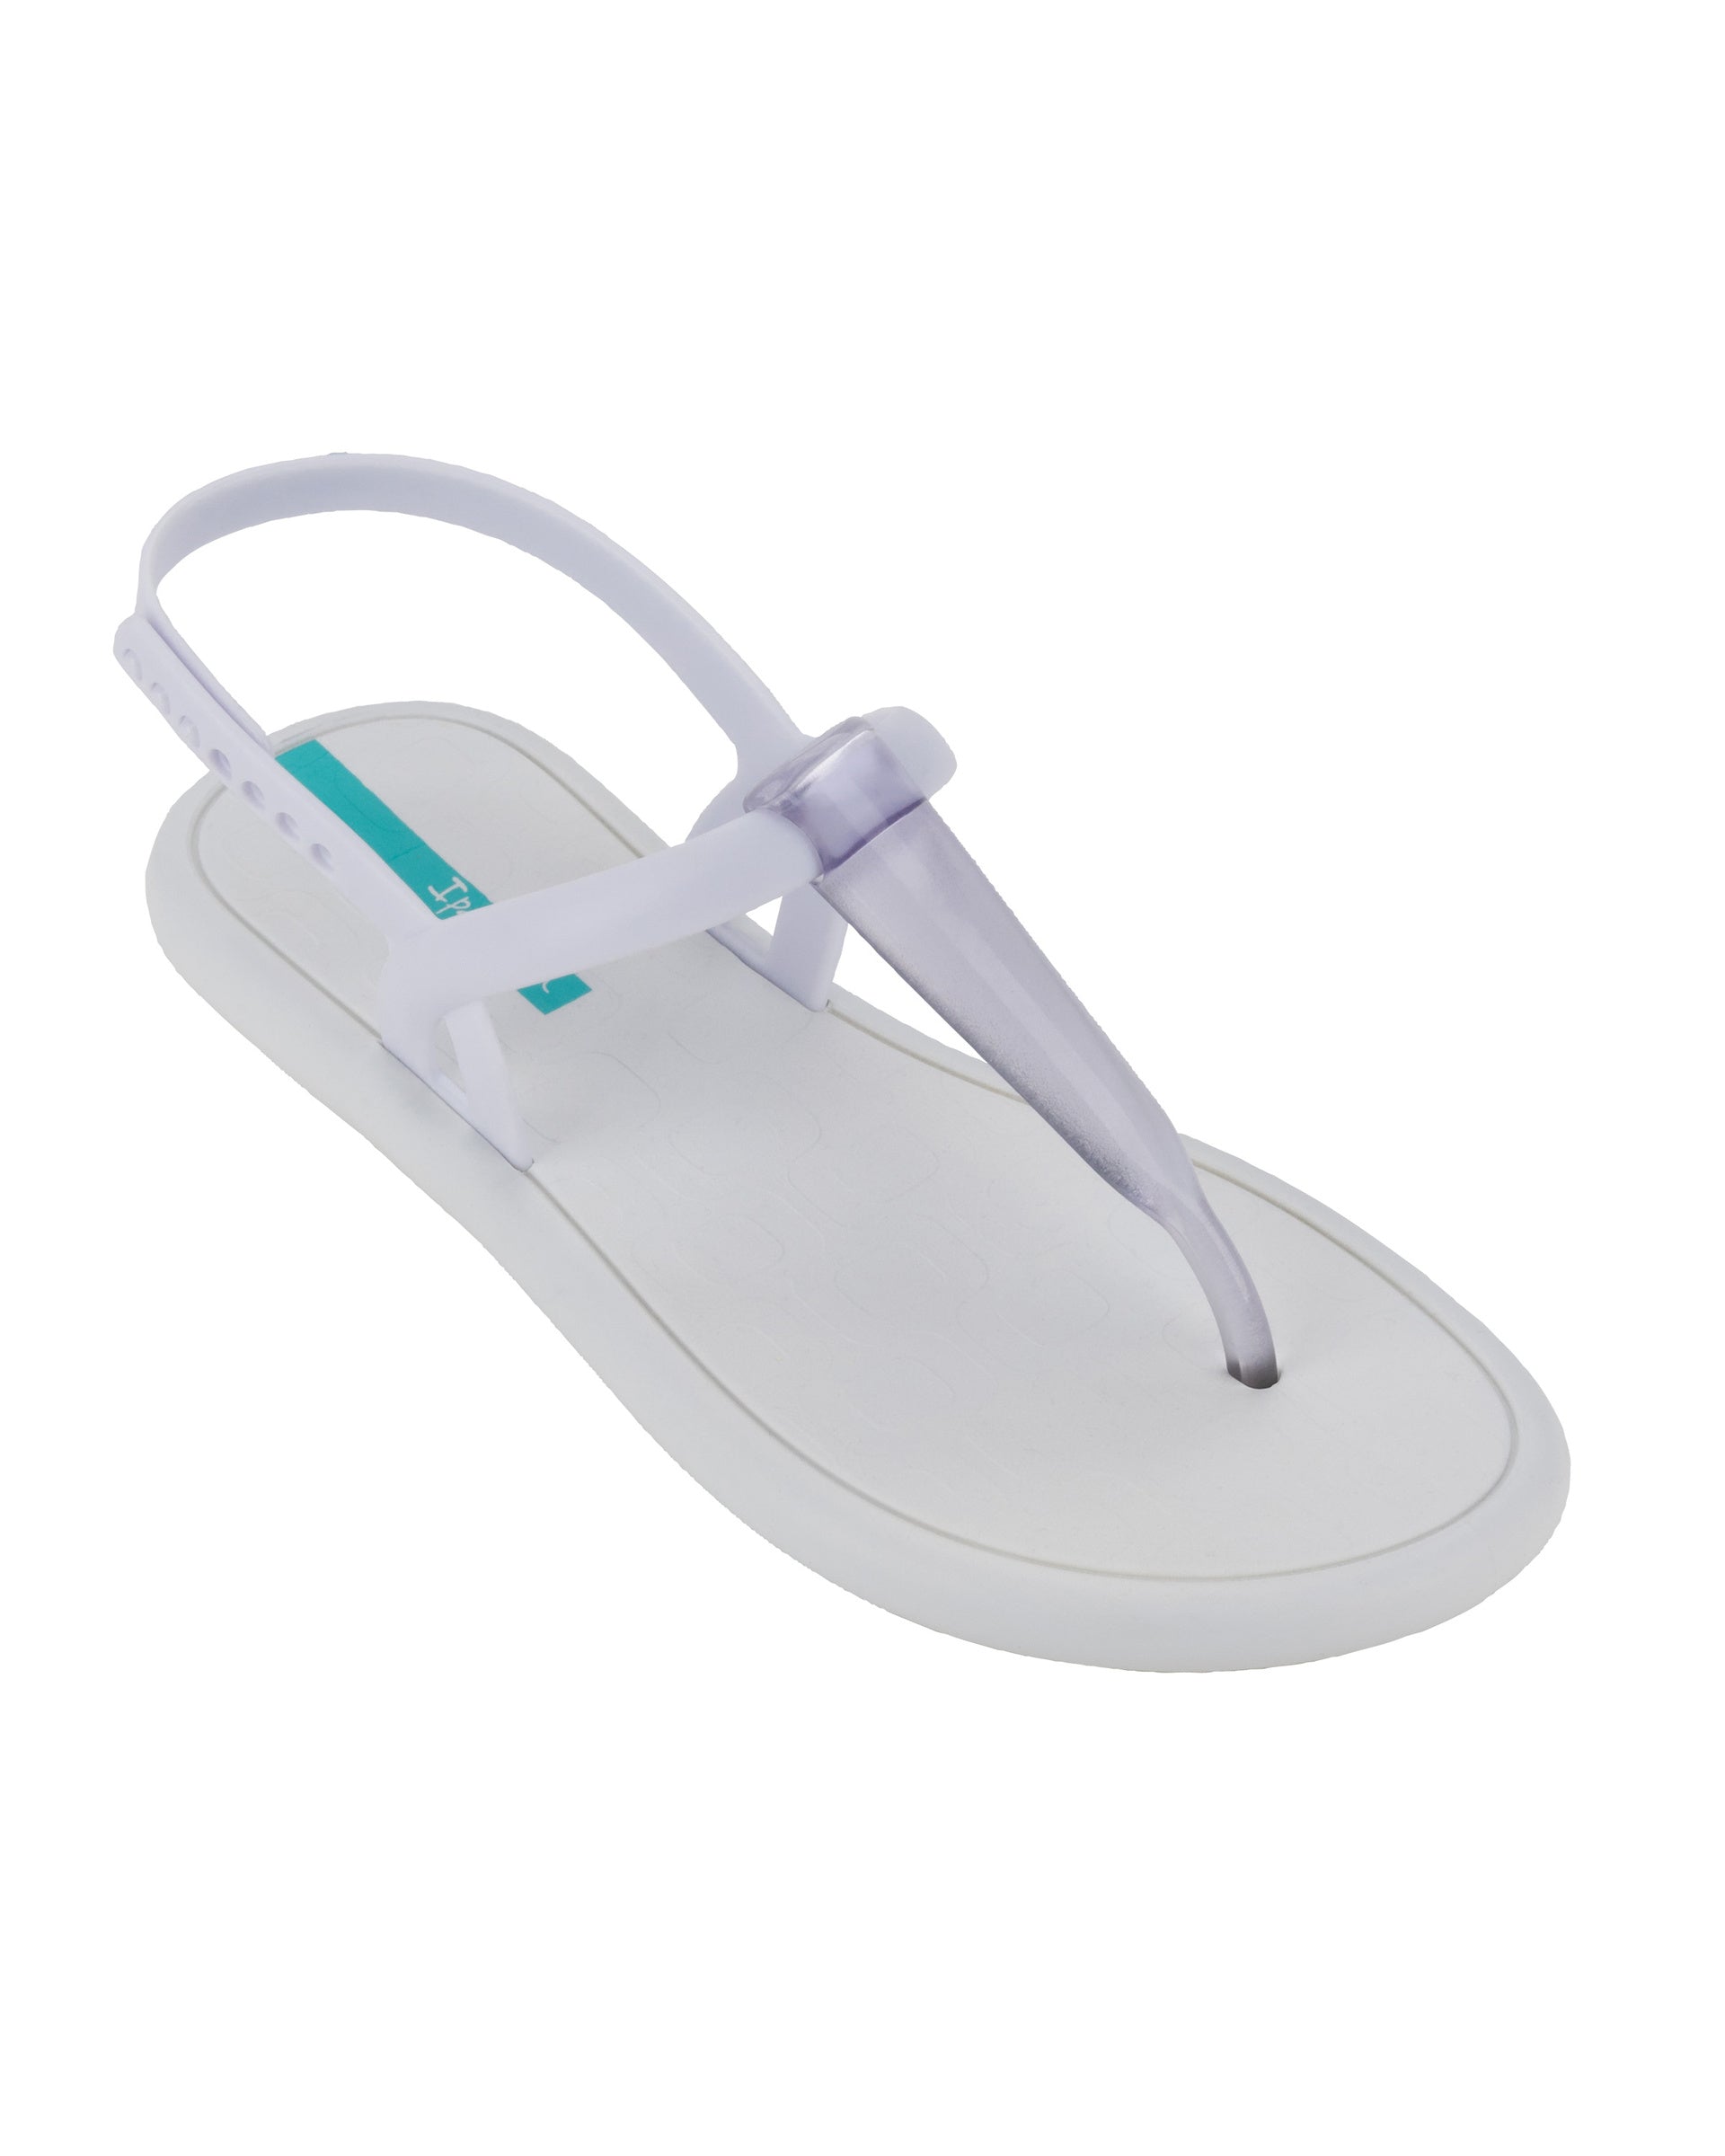 Angled view of a white Ipanema Glossy women's t-strap sandal.